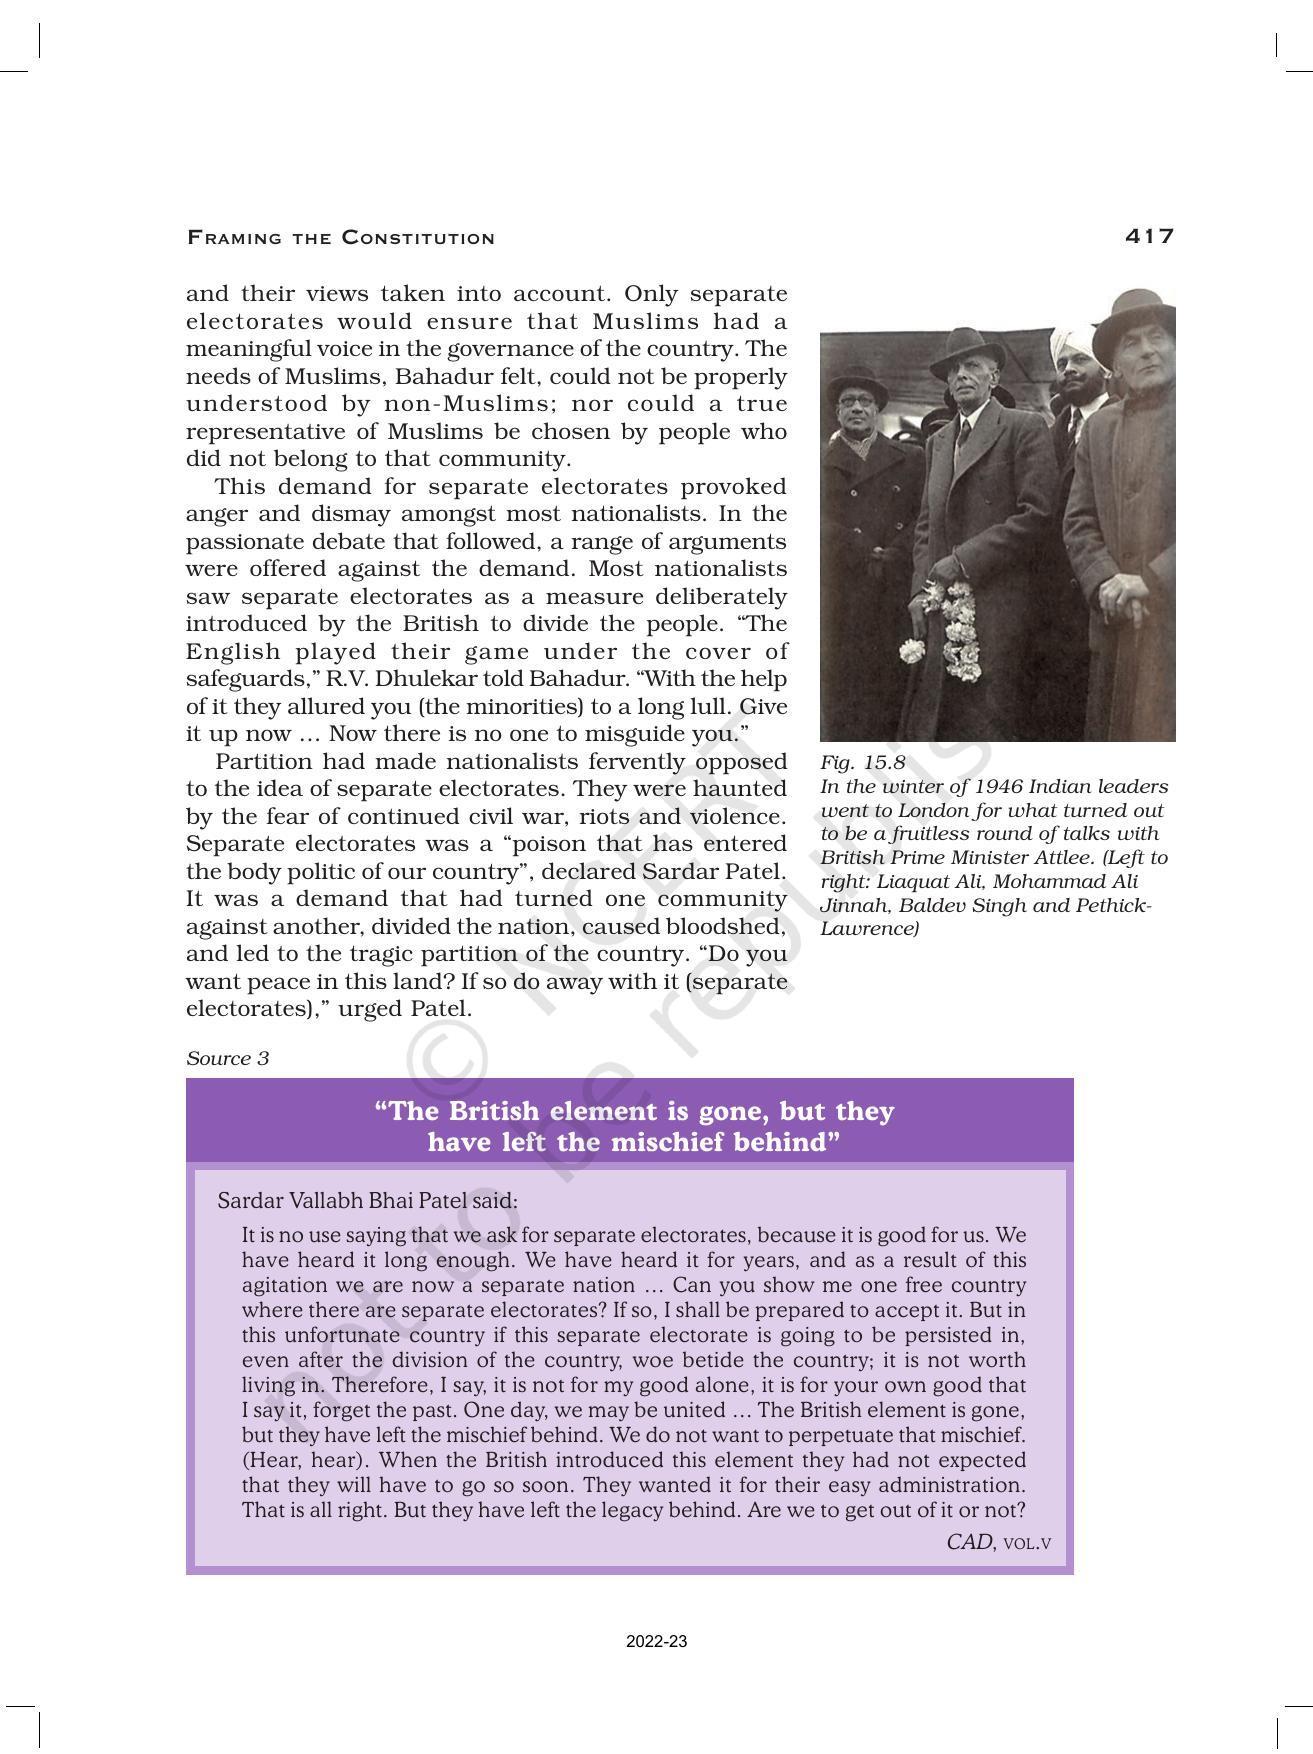 NCERT Book for Class 12 History (Part-III) Chapter 15 Framing and the Constitution - Page 13